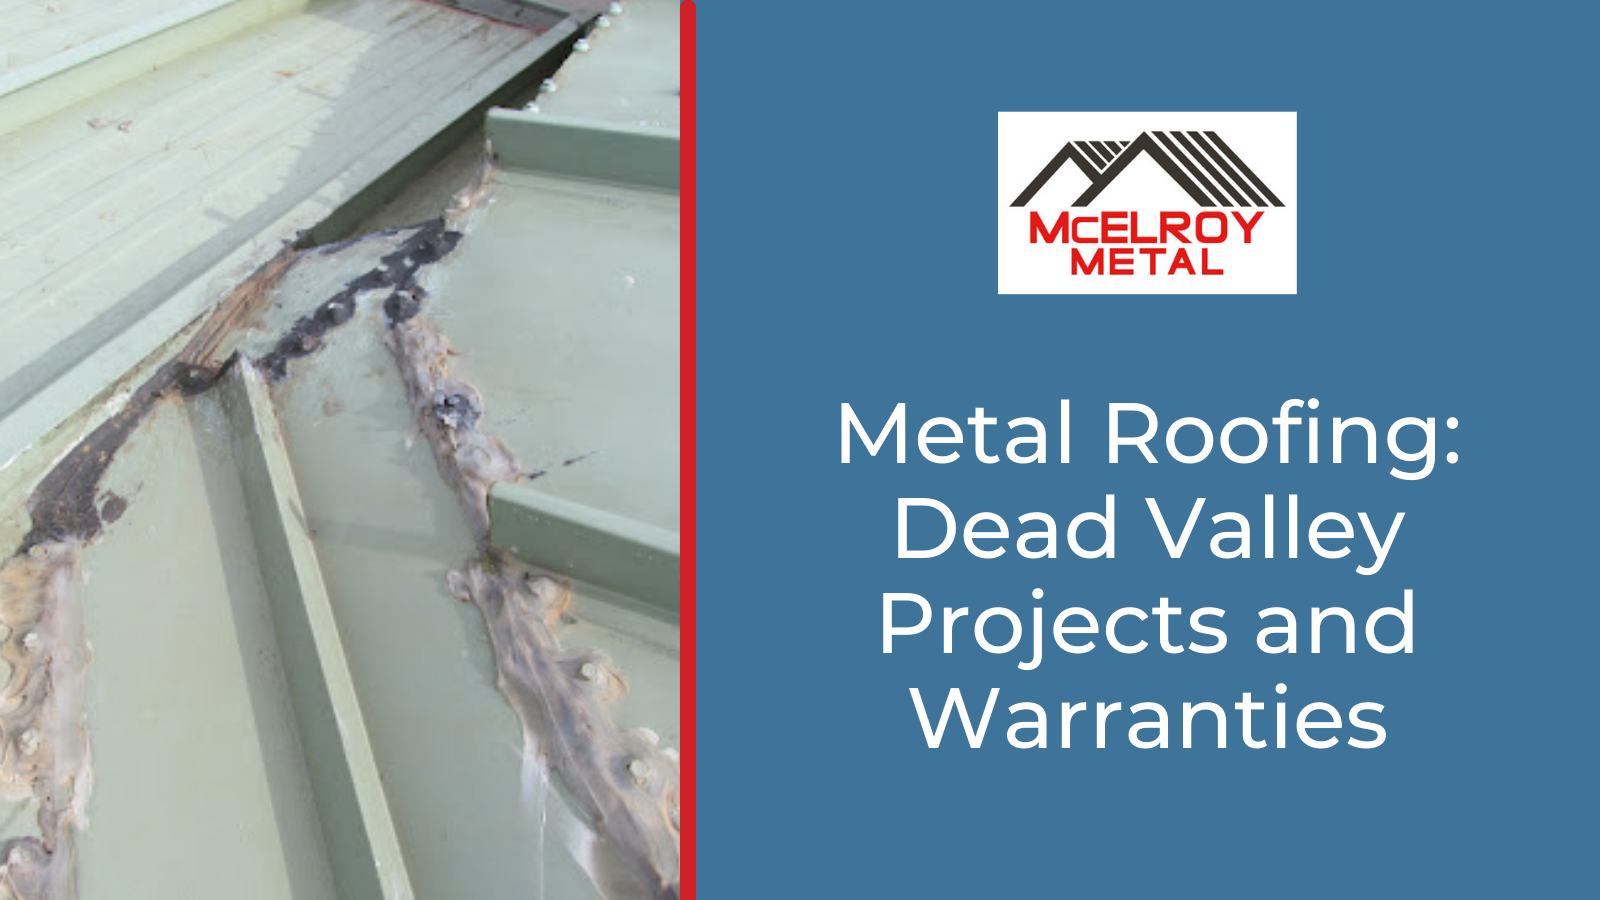 Metal Roofing: Dead Valley Projects and Warranties